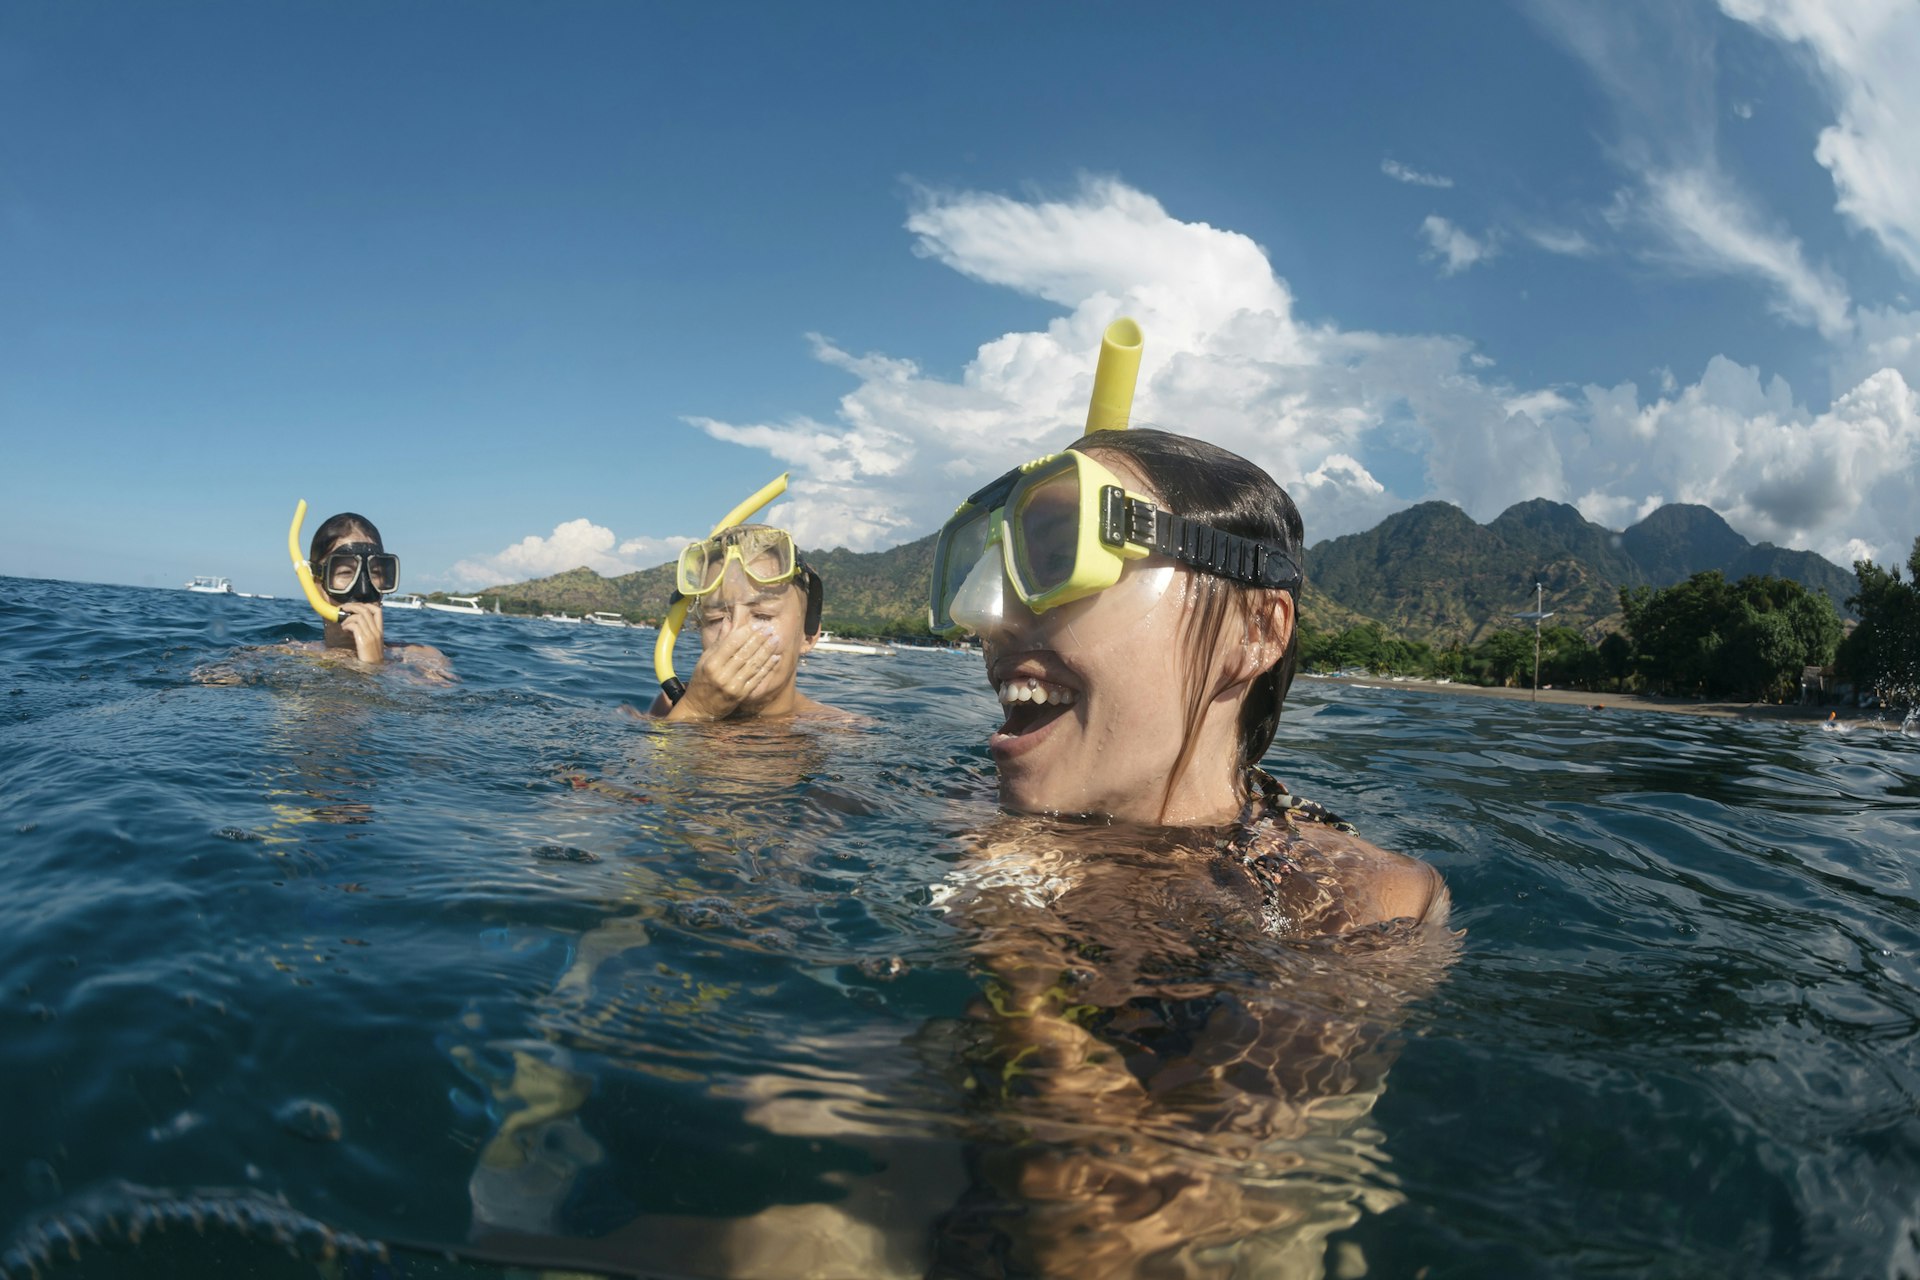 Three women on the surface if the water wearing snorkeling gear and laughing